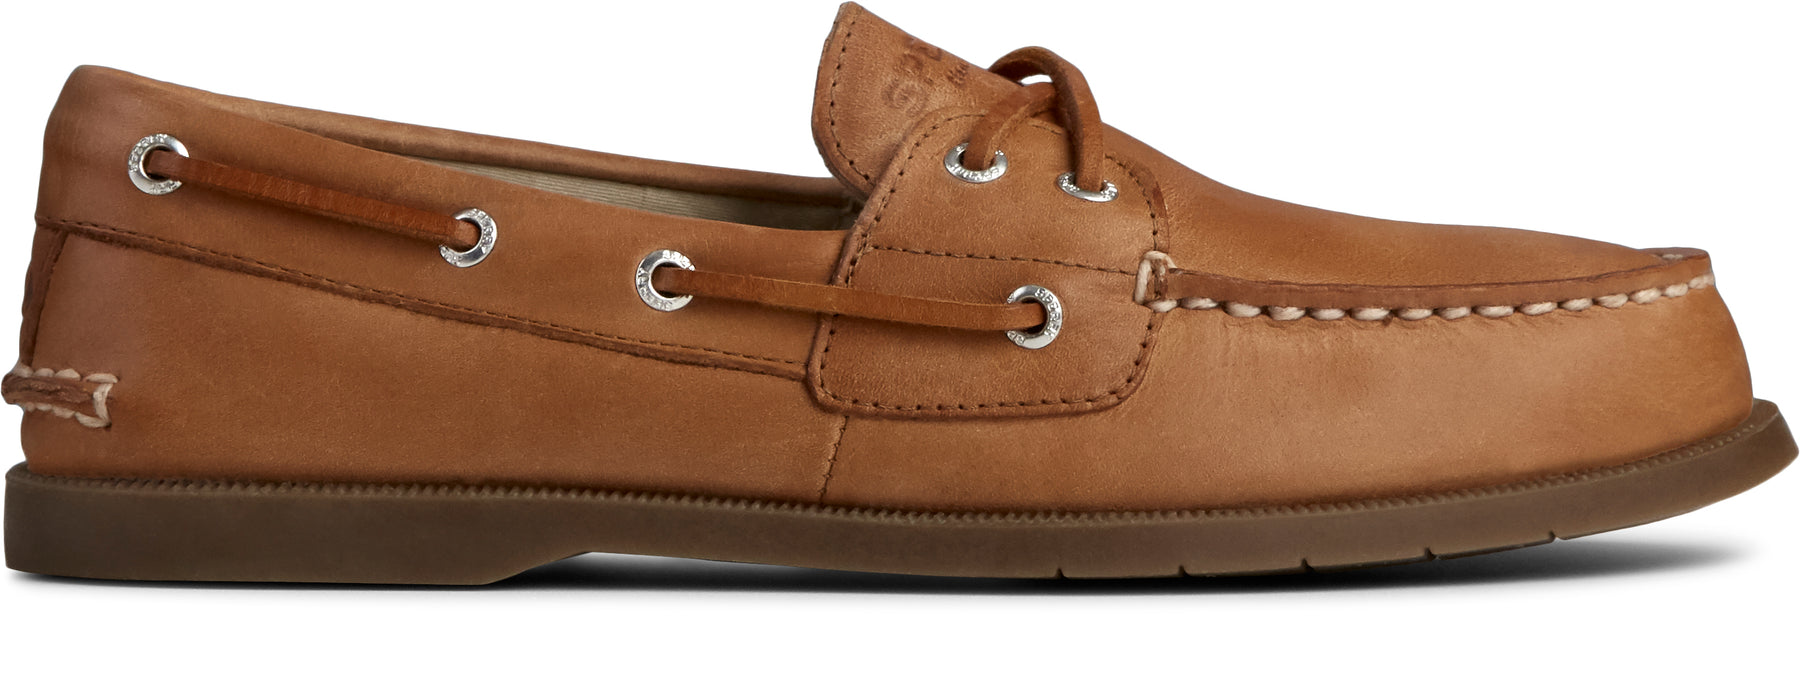 Women's Authentic Original Conway Sahara Boat Shoes (STS83275)